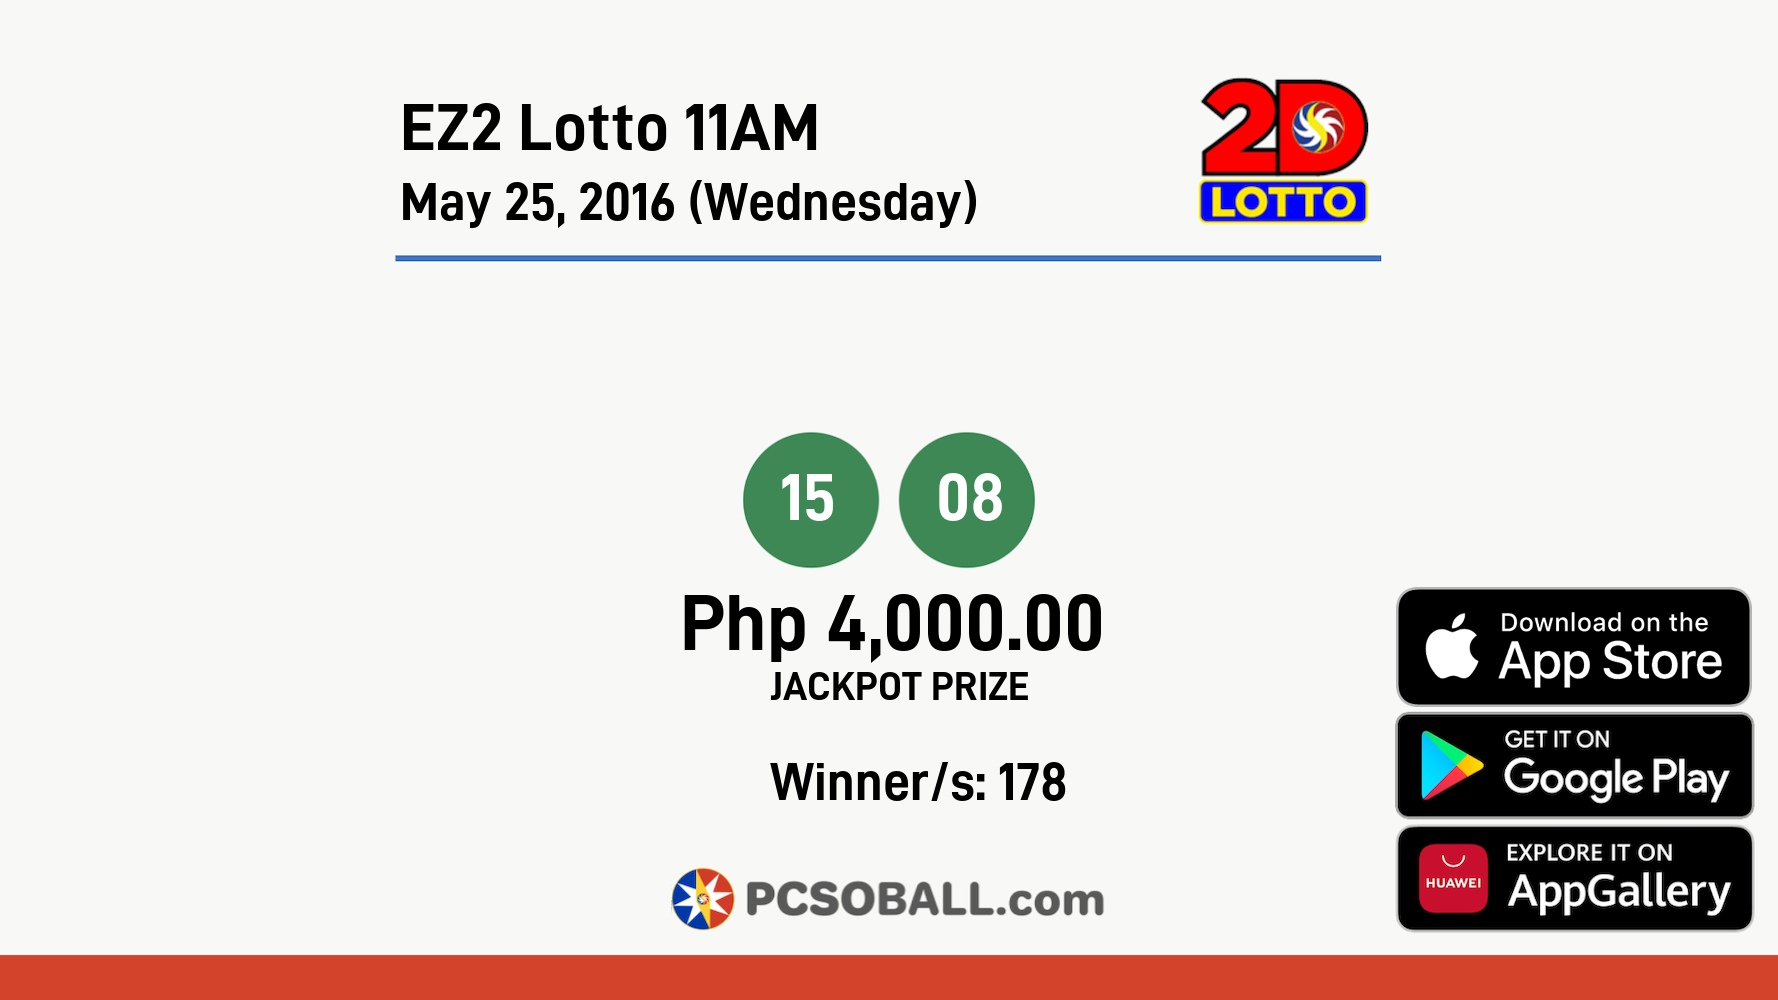 EZ2 Lotto 11AM May 25, 2016 (Wednesday) Result